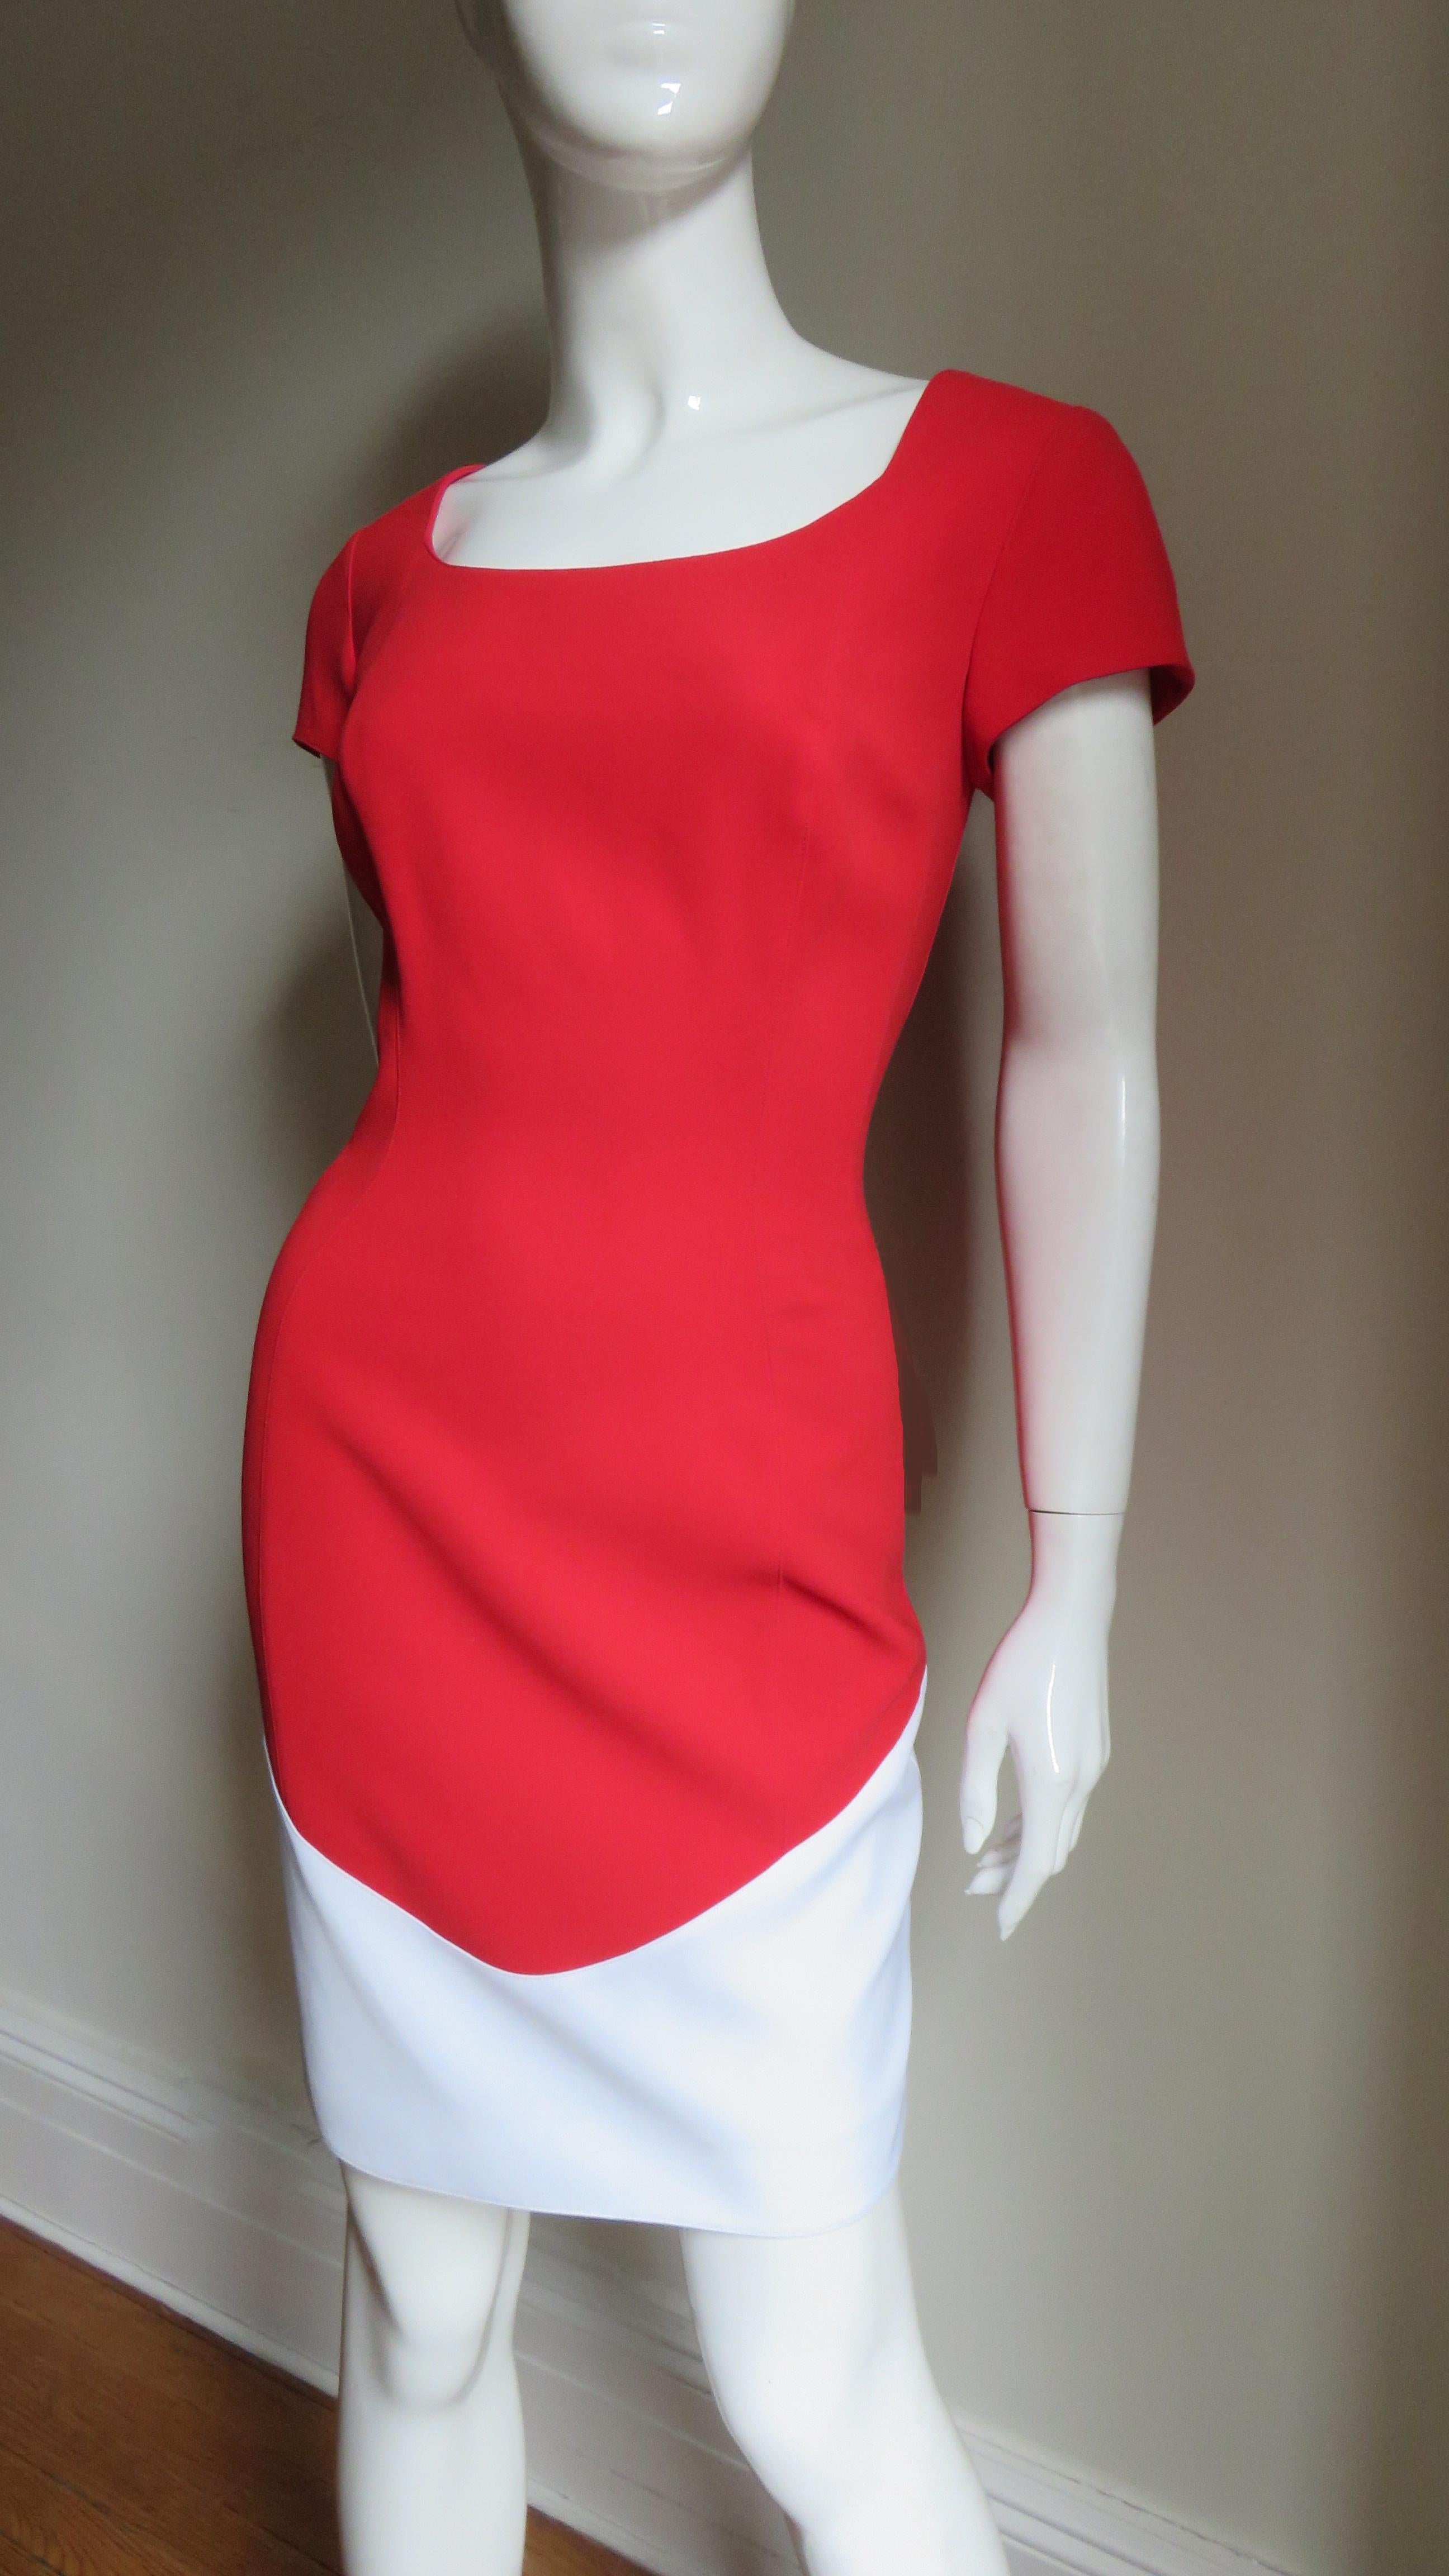 A beautiful red and white color block dress from Thierry Mugler.  It has short sleeves, a scoop neckline front and back and princess seaming with cleaver seaming and insets emphasizing the waist.  The lower portion of the straight skirt has a wide